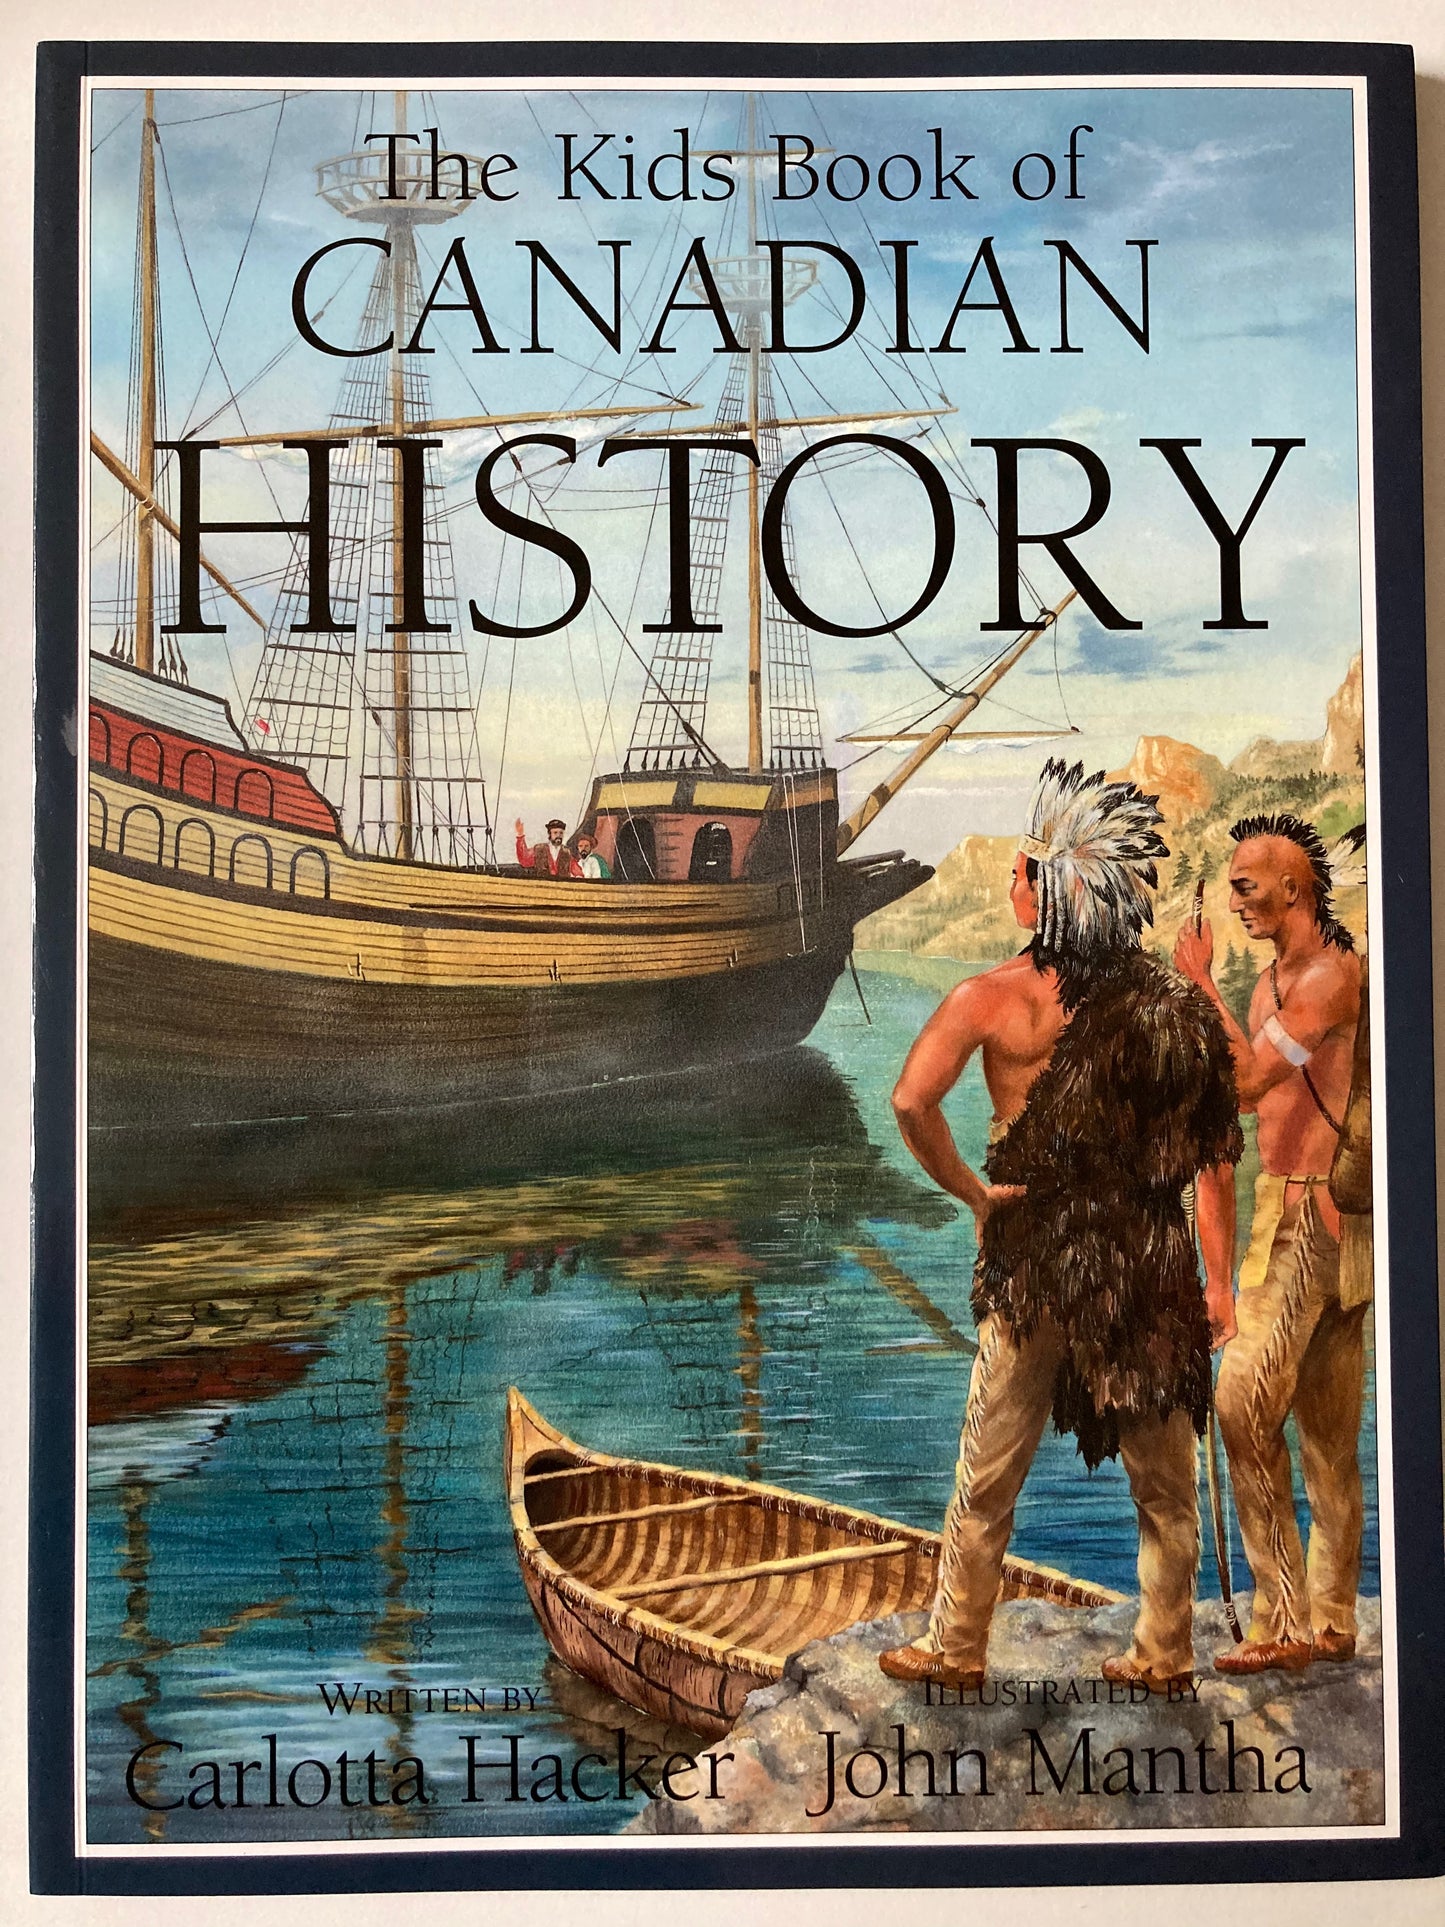 Educational Book - The Kids Book of CANADIAN HISTORY